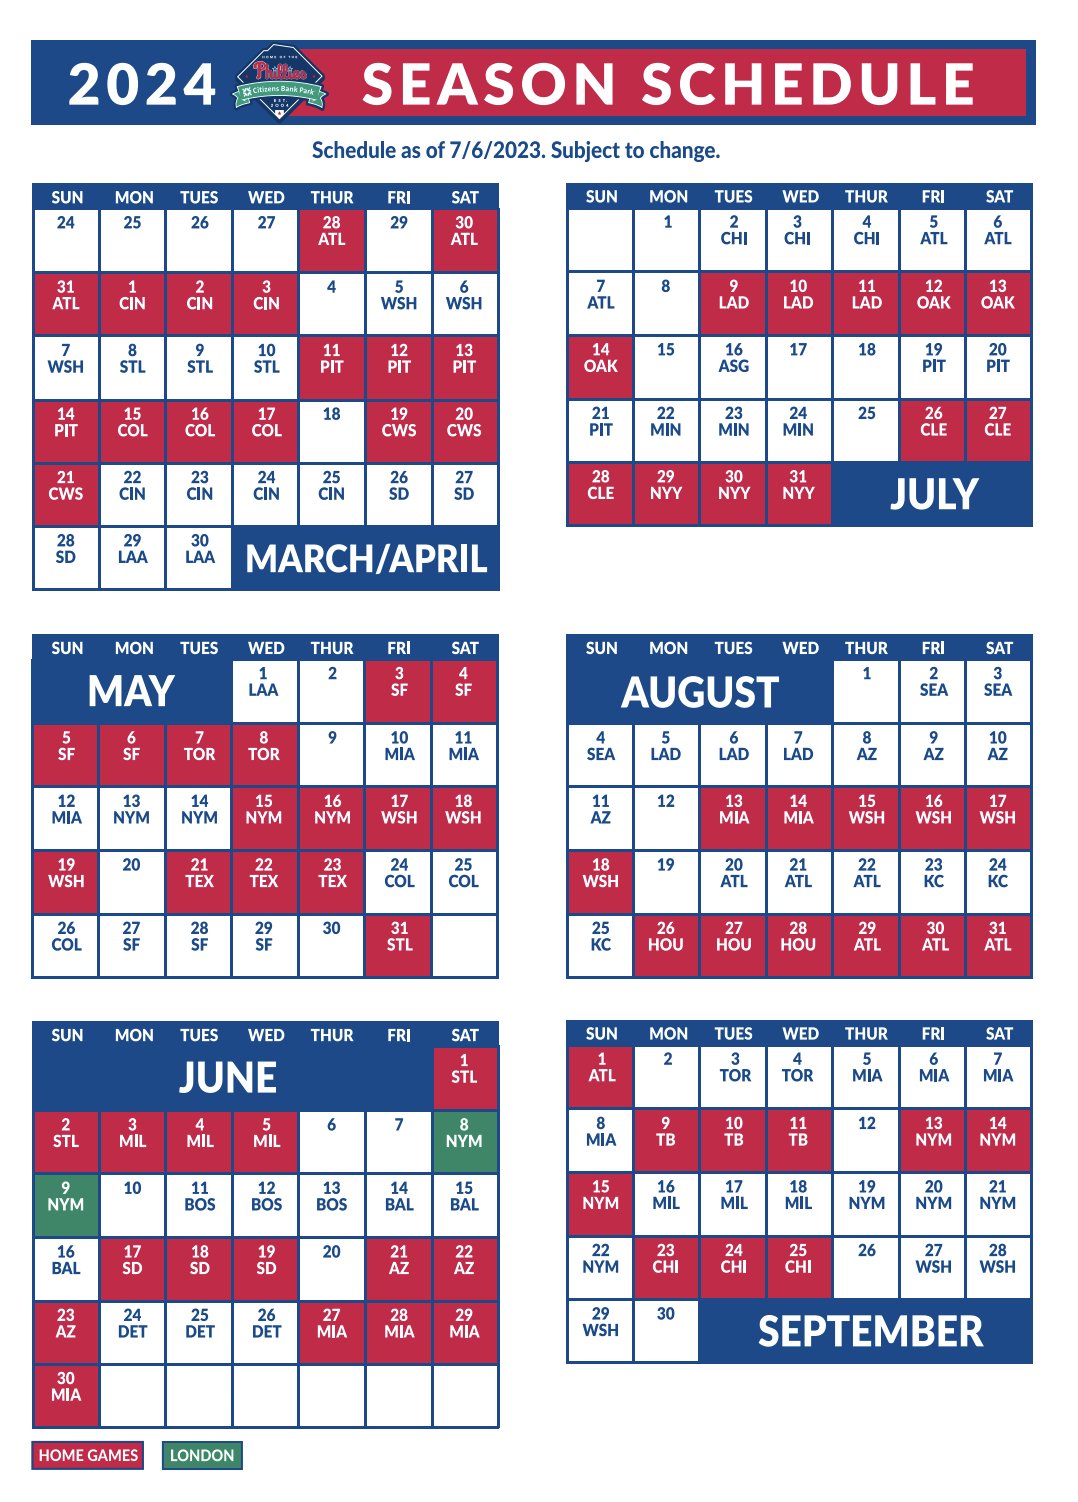 David Malandra Jr on Twitter "Phillies schedule for 2024 is released